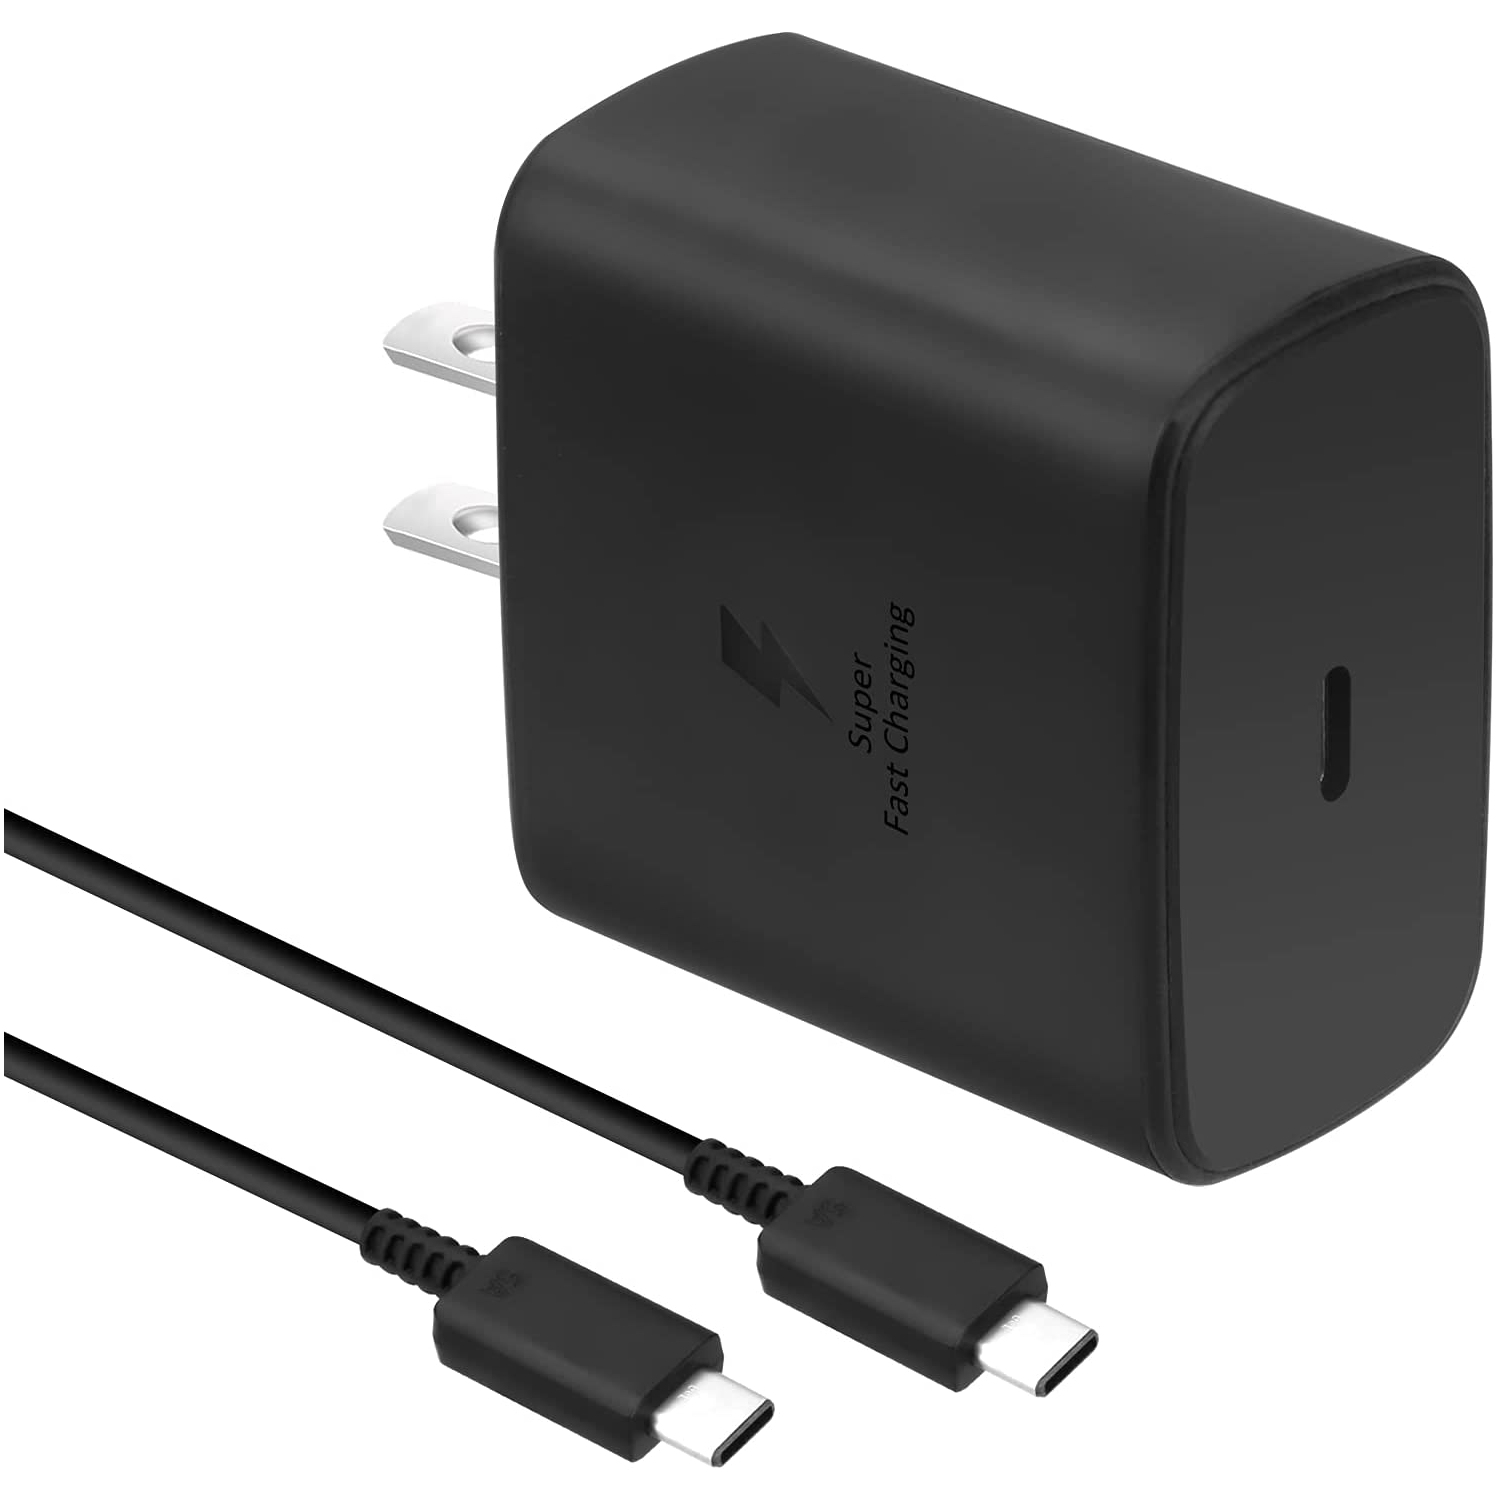 CABLESHARK 45W USB-C Super Fast Charging Wall Charger with 6.6 Feet Type C-C Cable COMPATIBLE for Samsung Galaxy S21/Z Fold 2/Note 20 Ultra Note10/10+/S20 Ultra/S20 Plus/S20 5G/S10/S8/Note 10/iPad Pro